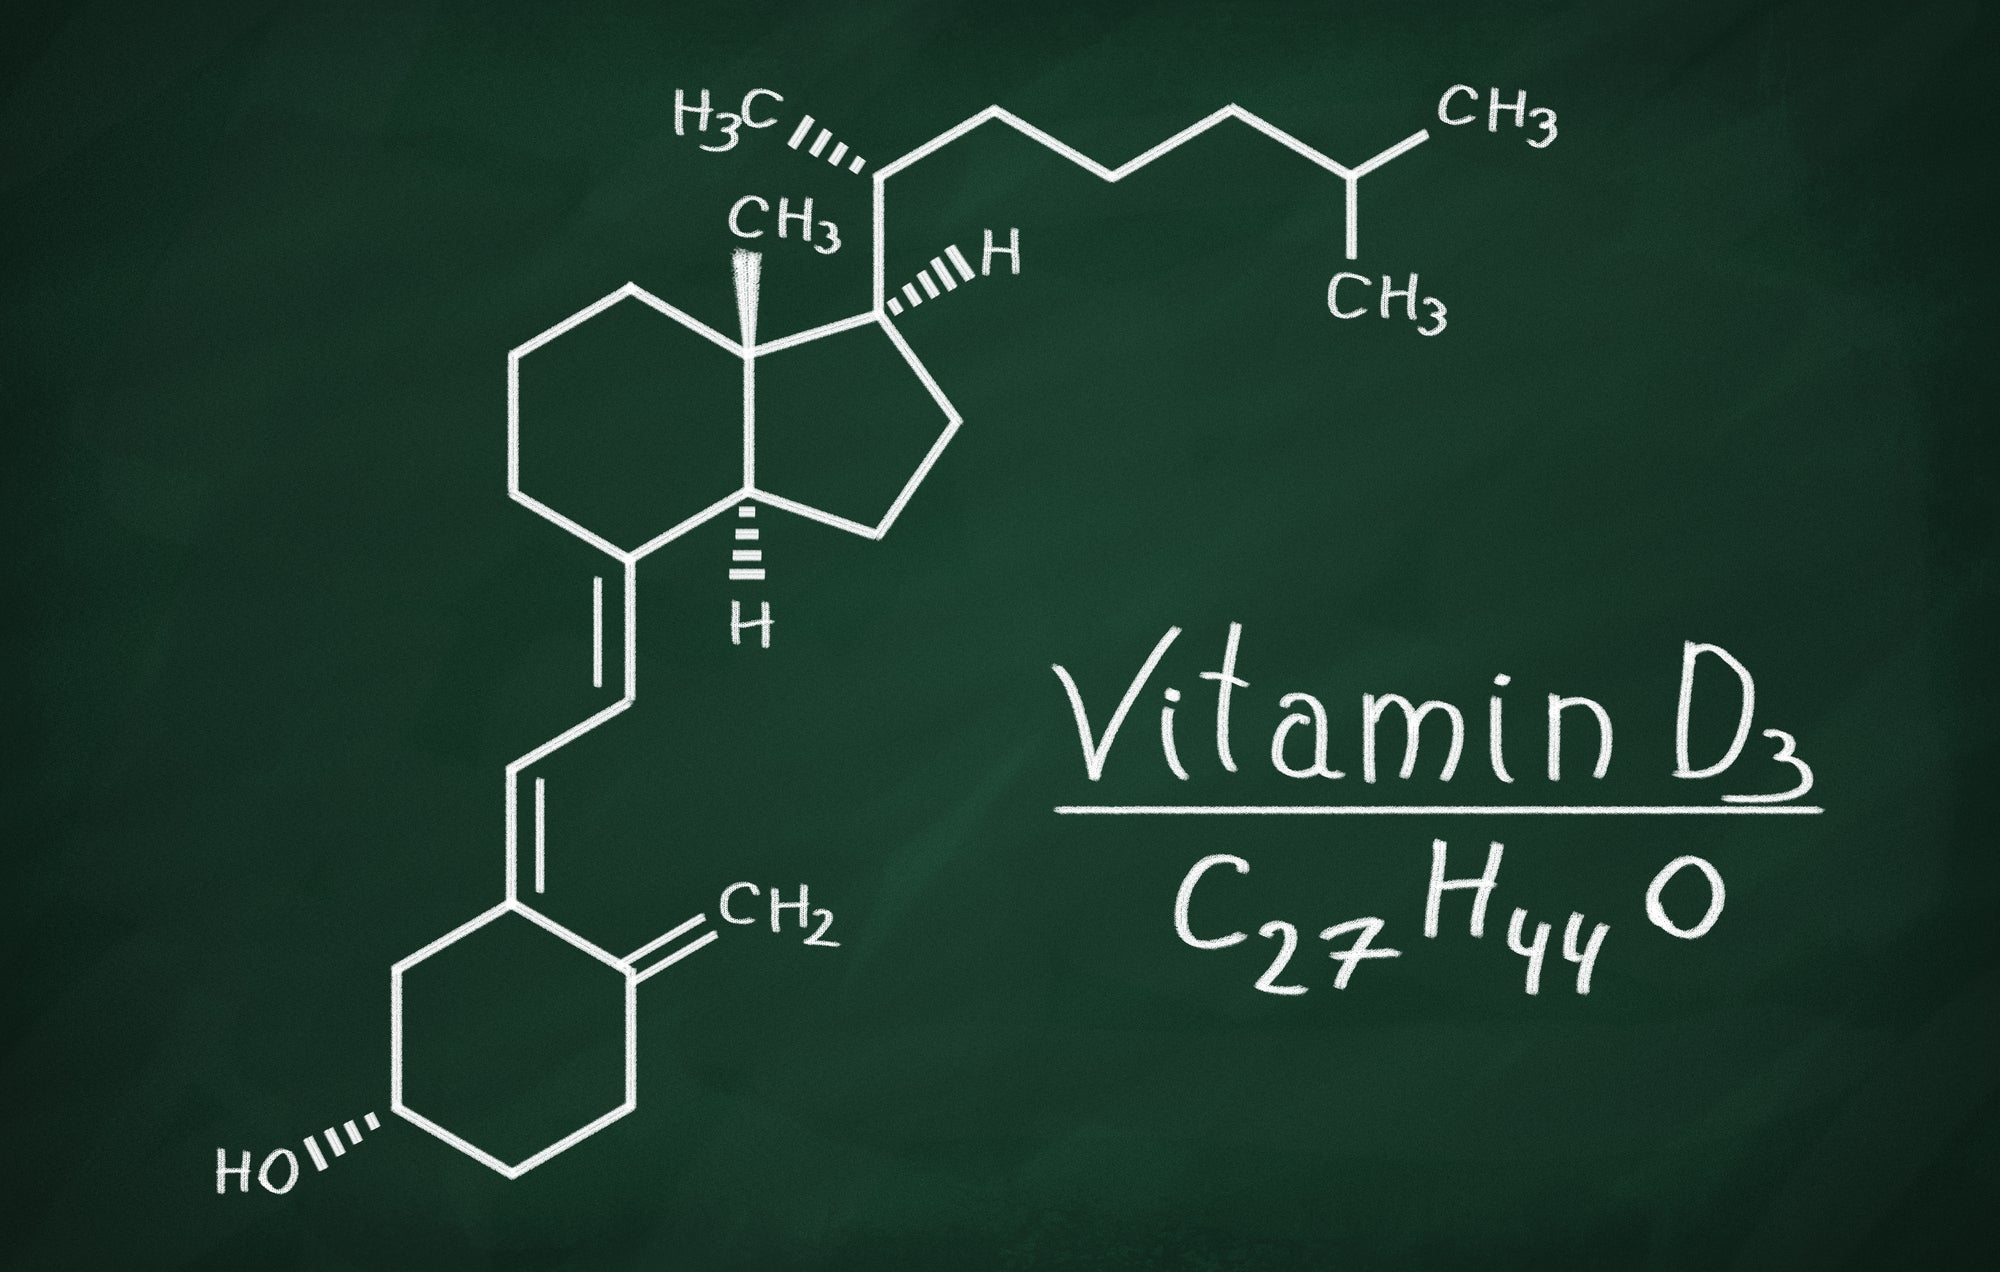 The Mind-Blowing Effectiveness of Vitamin D In Reducing Covid-19 Infections